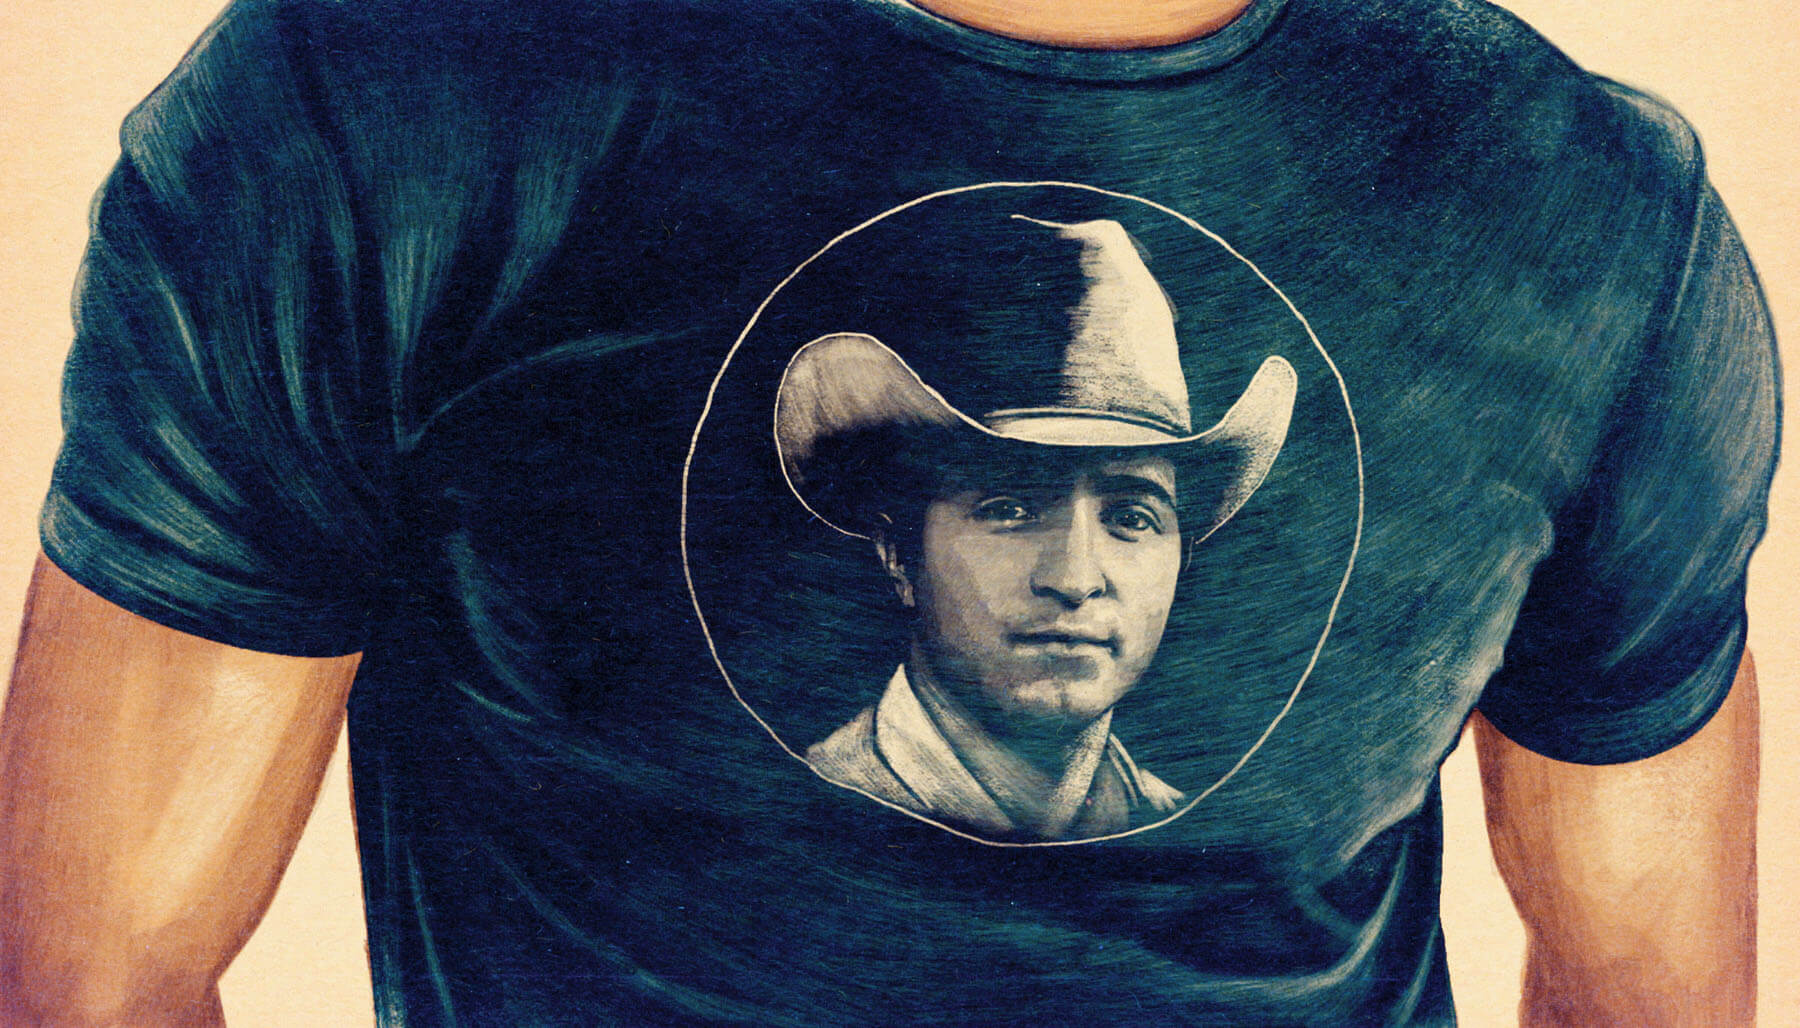 An illustration of a man wearing a t-shirt with a man's face in a cowboy hat